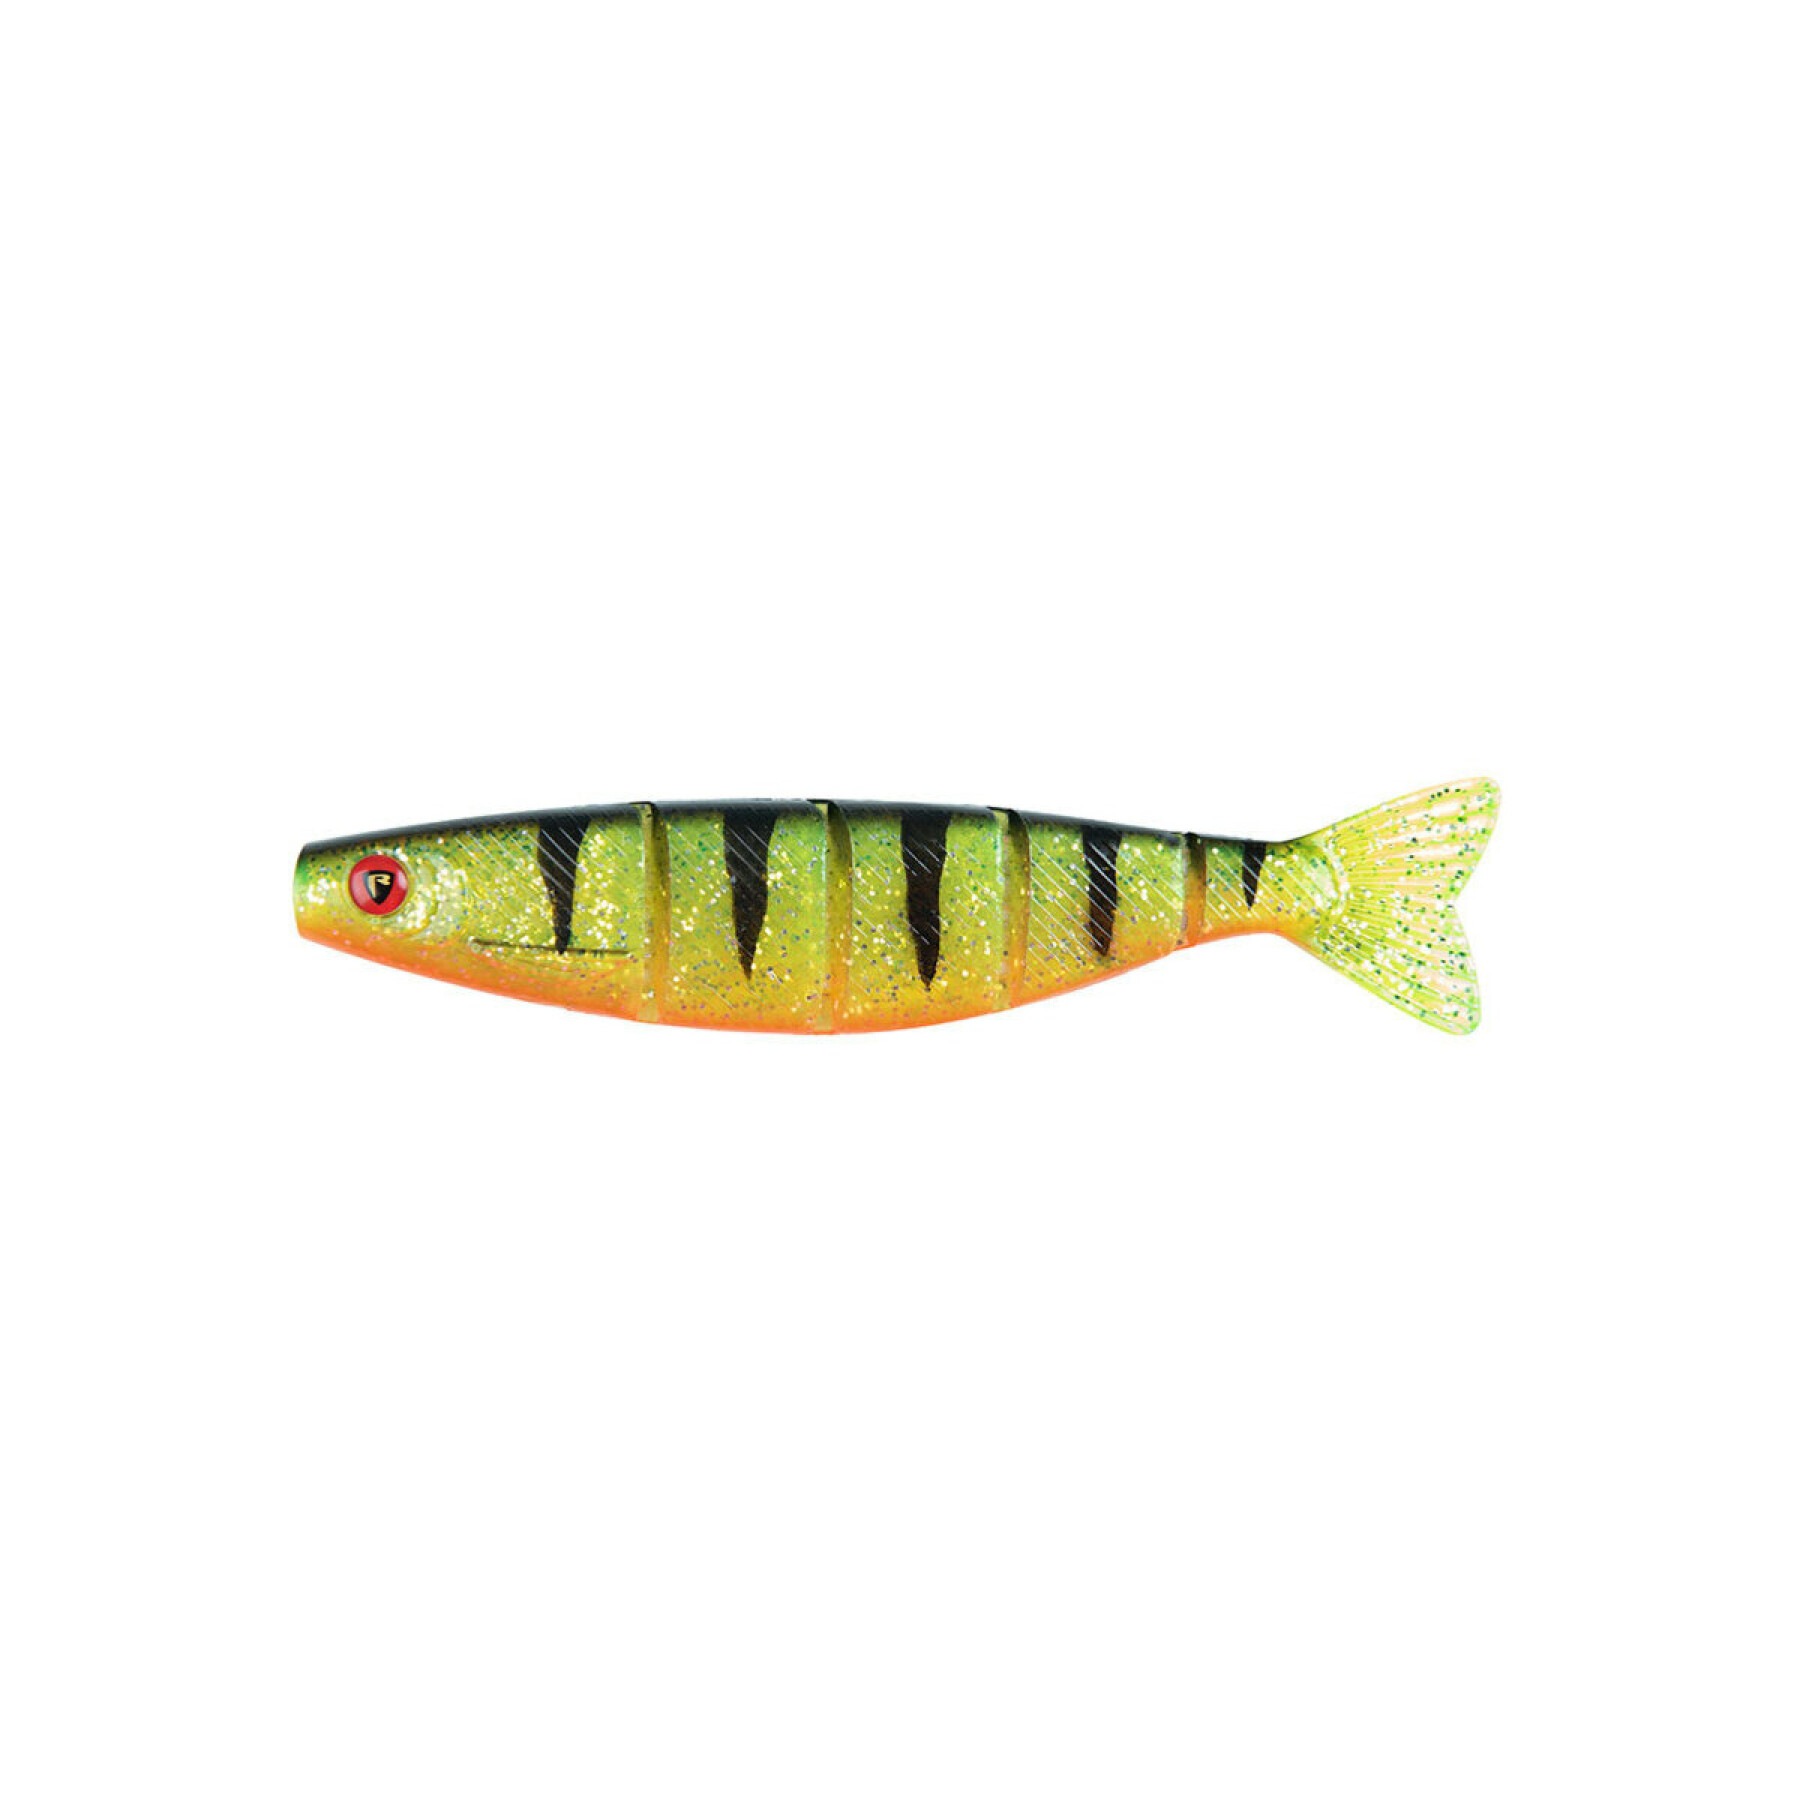 Engodo suave Fox Rage Pro Shad Jointed